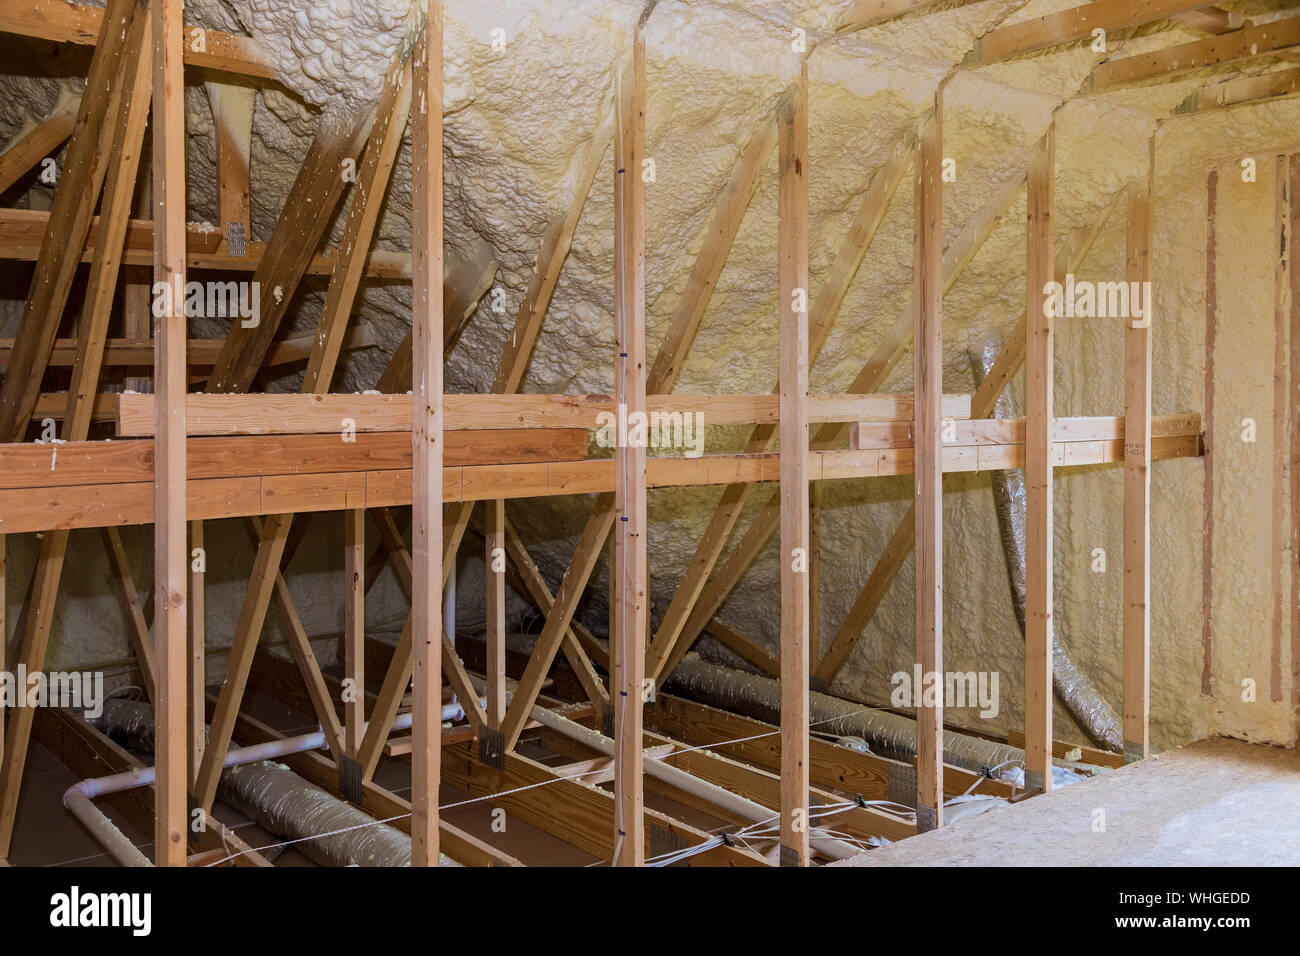 thermal and hidro insulation Inside wall insulation in wooden house, building under construction Stock Photo